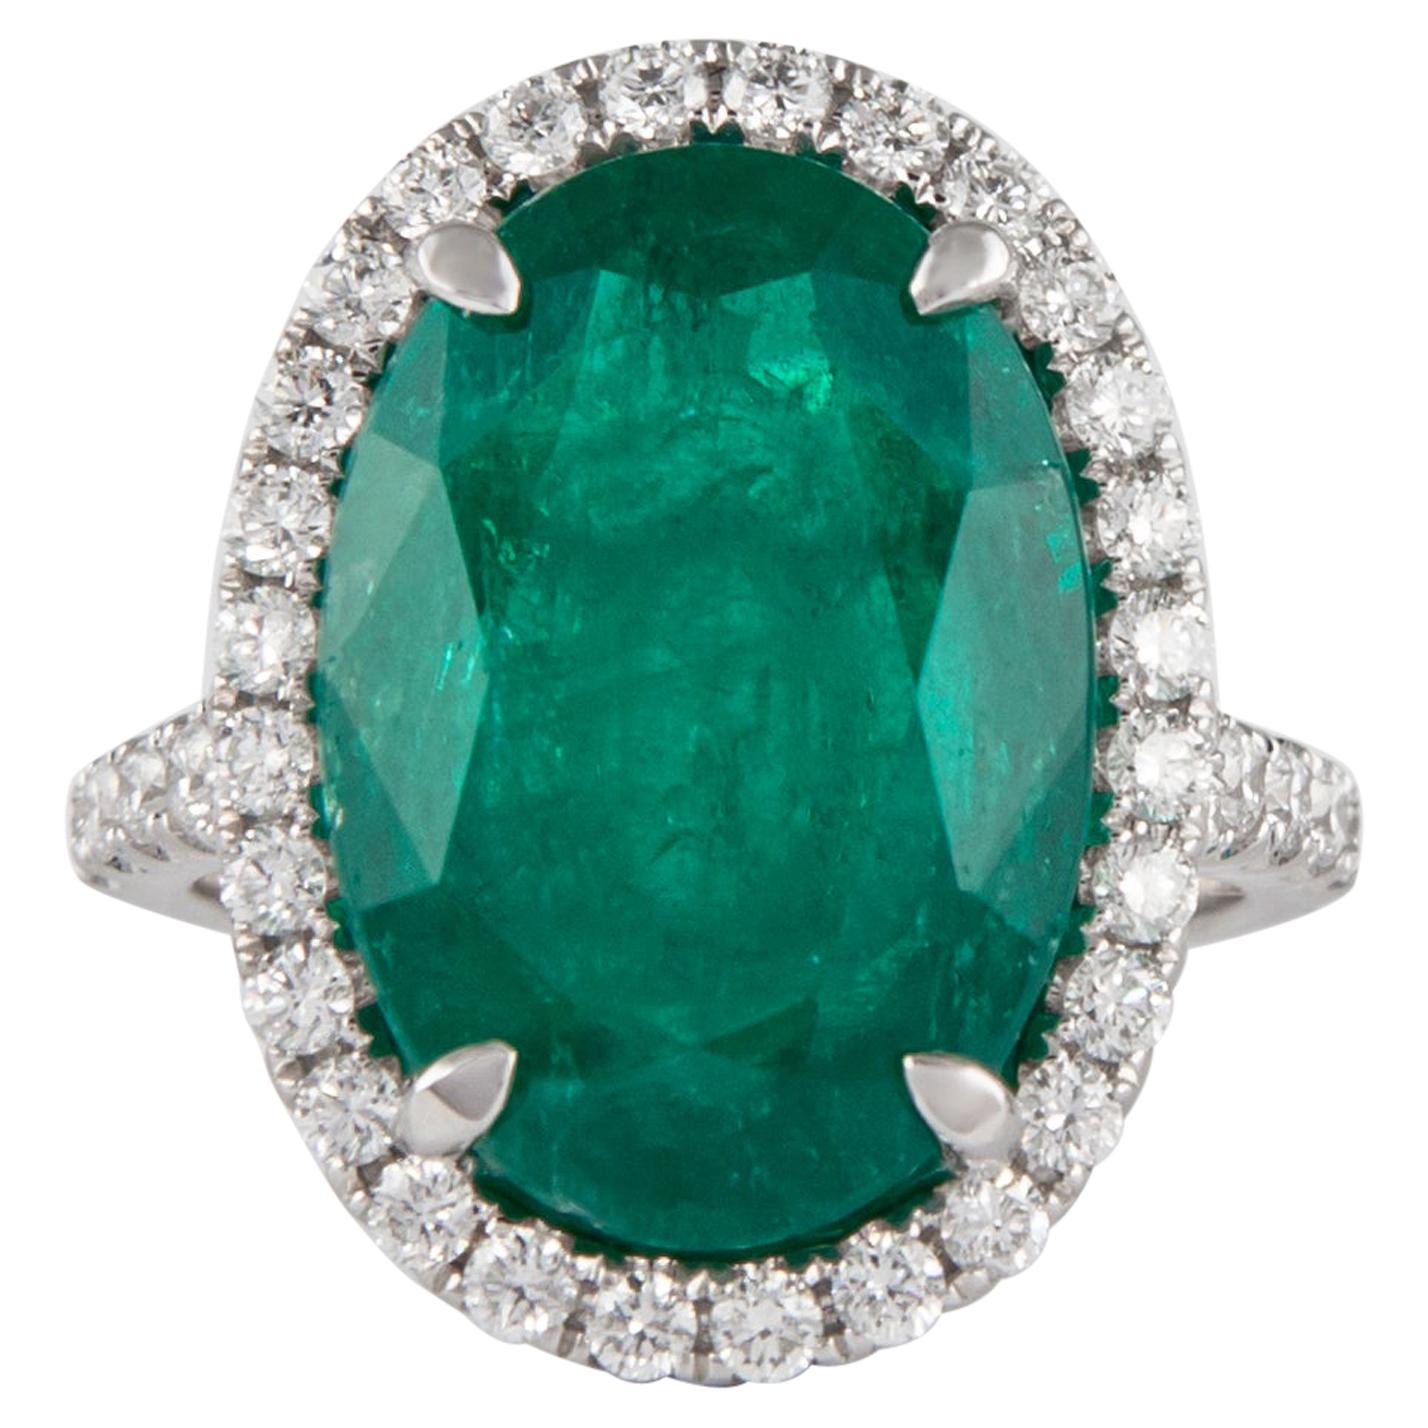 Alexander 8.76ct Carat Oval Emerald with Diamond Halo Ring 18k White Gold